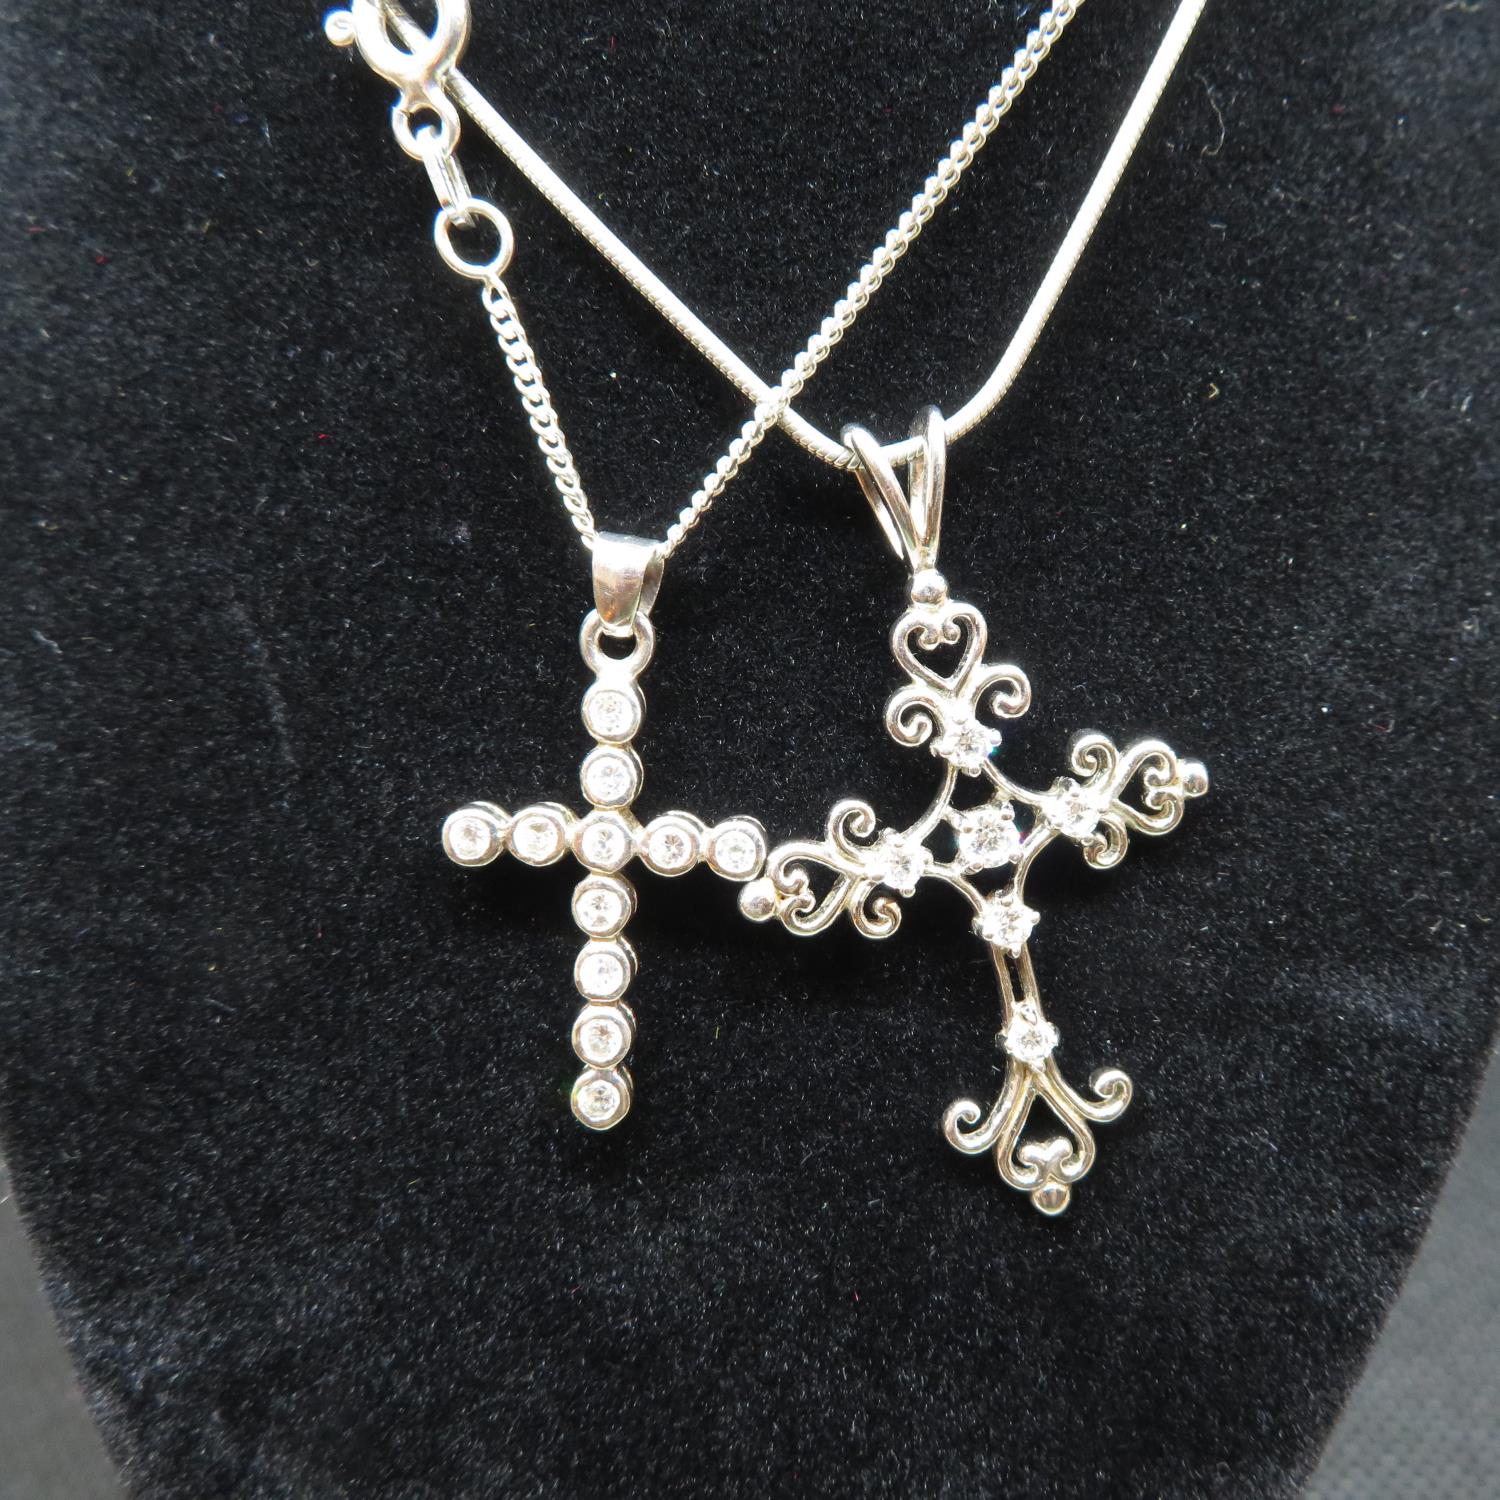 2 silver stone set crosses on 16" chains 7.5g - Image 2 of 3